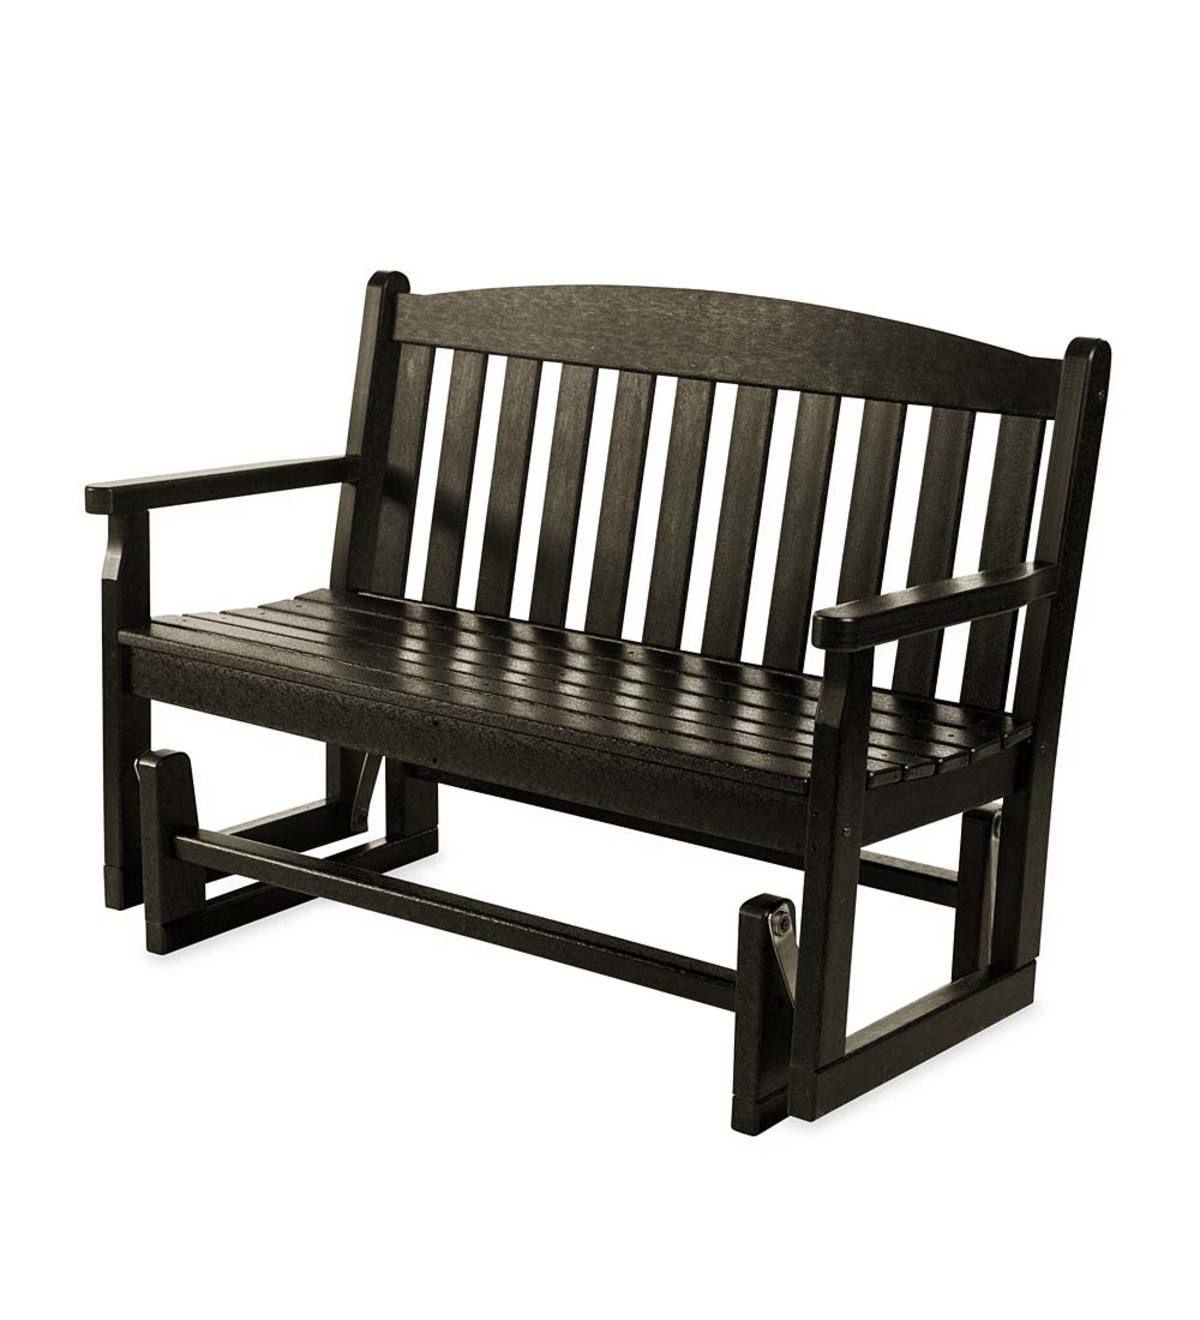 Polywood Outdoor Glider Bench – Black | Plowhearth Regarding Black Steel Patio Swing Glider Benches Powder Coated (View 14 of 25)